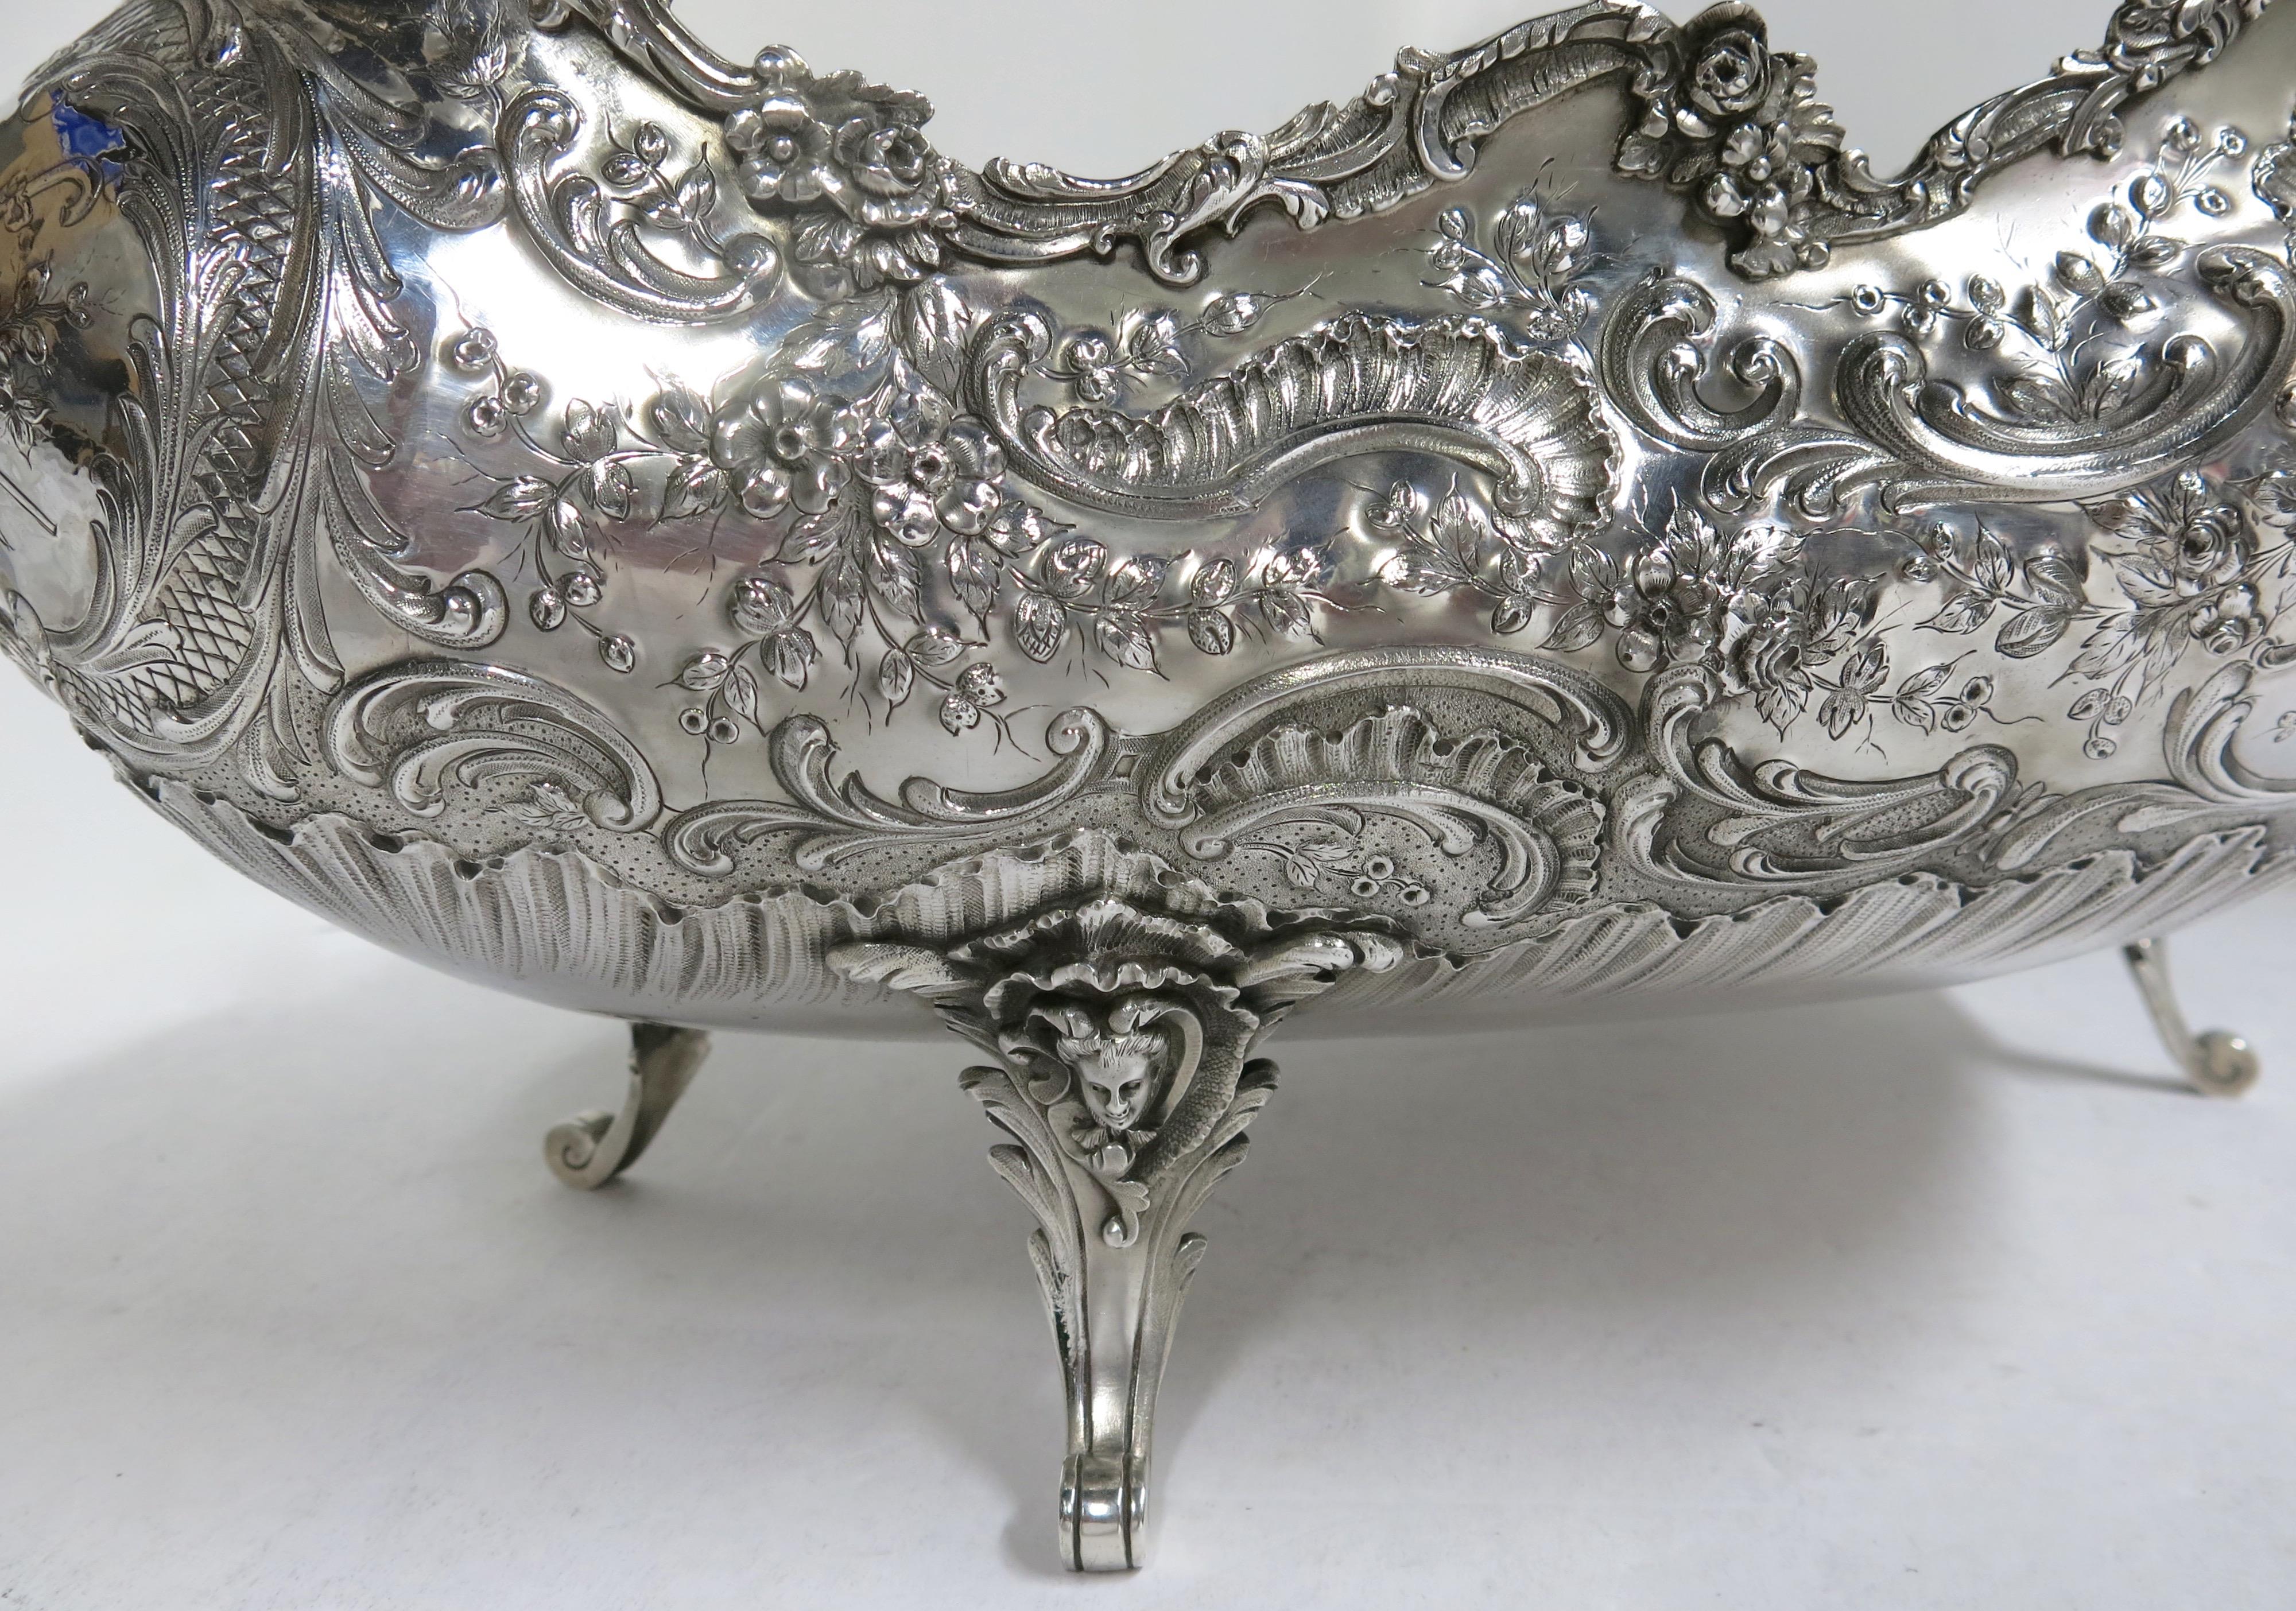 Stunning and Decorative, Large Oval Sterling Silver Antique French Centerpiece 2